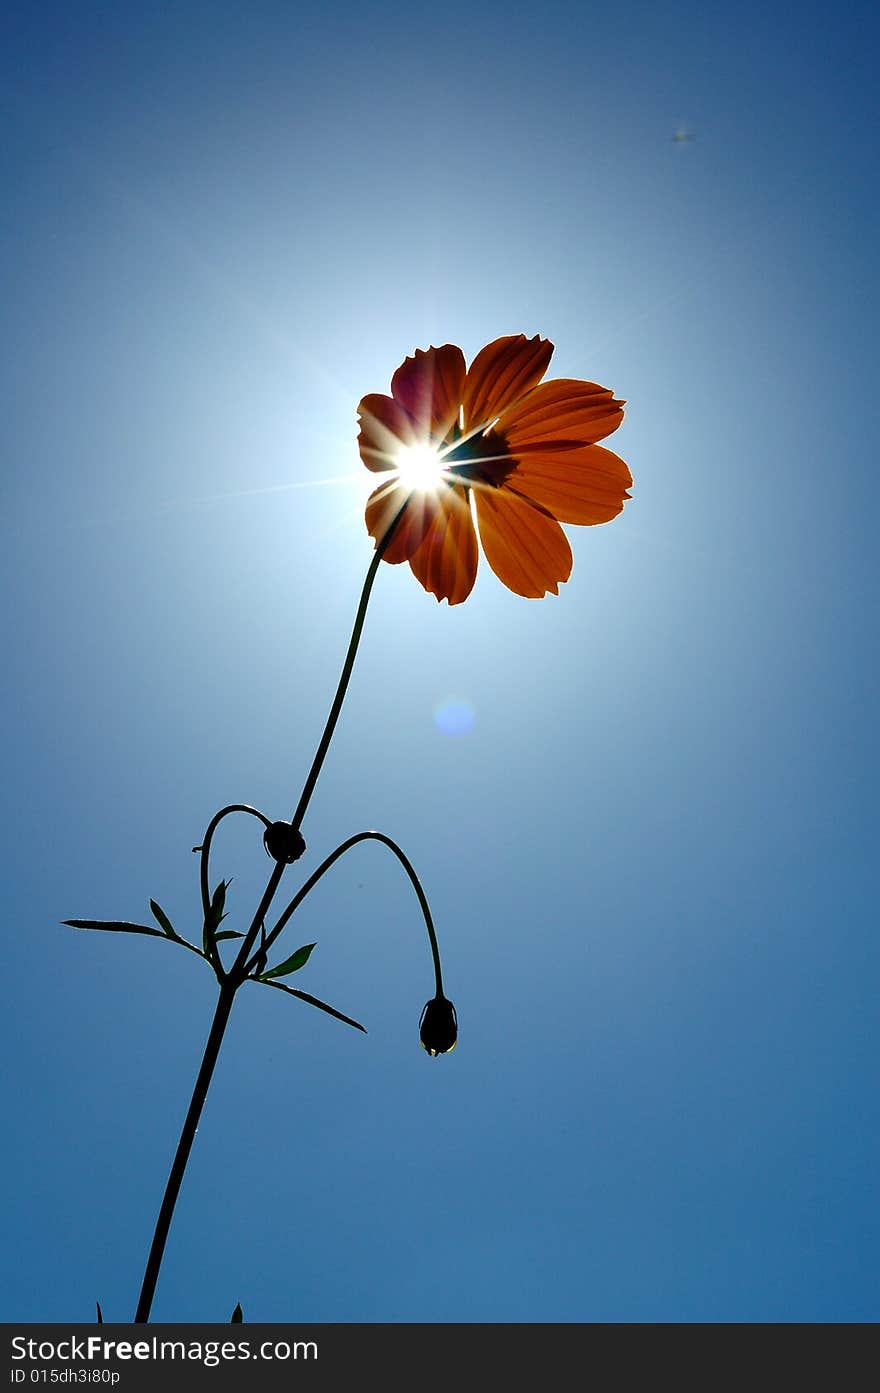 Flower with sunrise,In the morning. Flower with sunrise,In the morning.